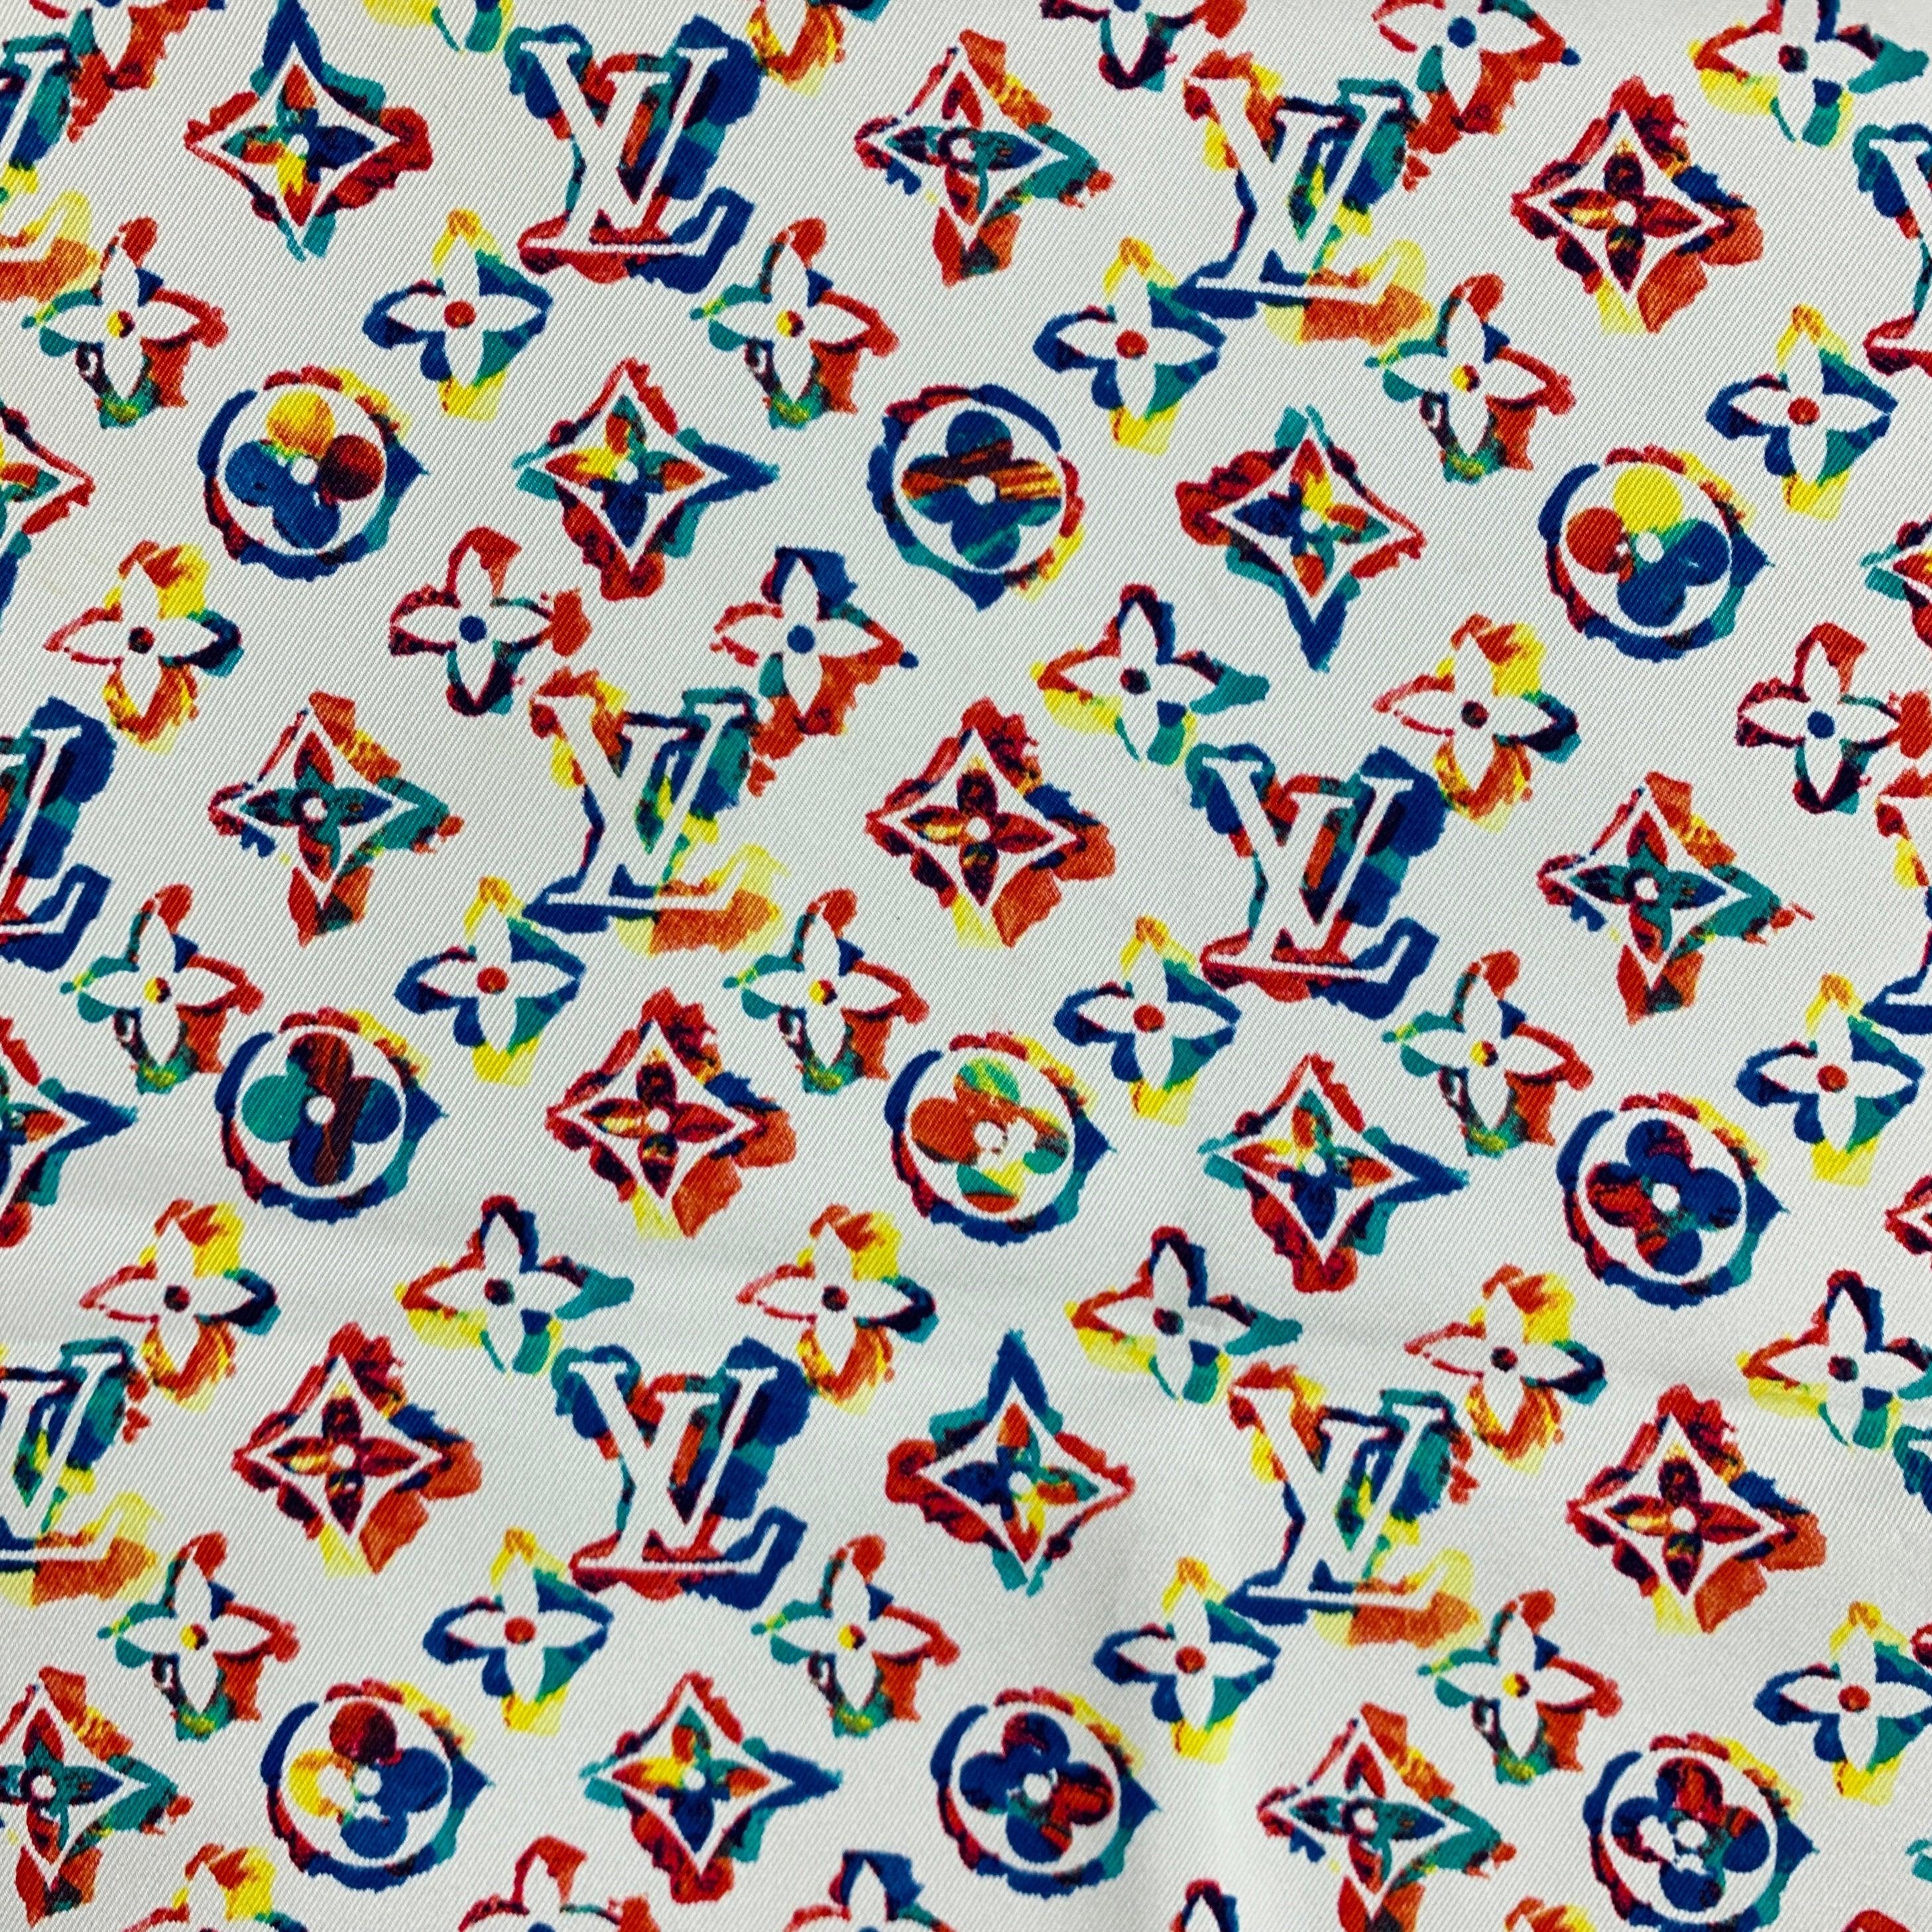 LOUIS VUITTON scarf
in a white and multi-color silk featuring rainbow monogram and floral print, and luxurious hand rolled edges.Good Pre-Owned Condition. 

Measurements: 
  26.5 inches  x 26.5 inches 
  
  
 
Reference No.: 129000
Category: